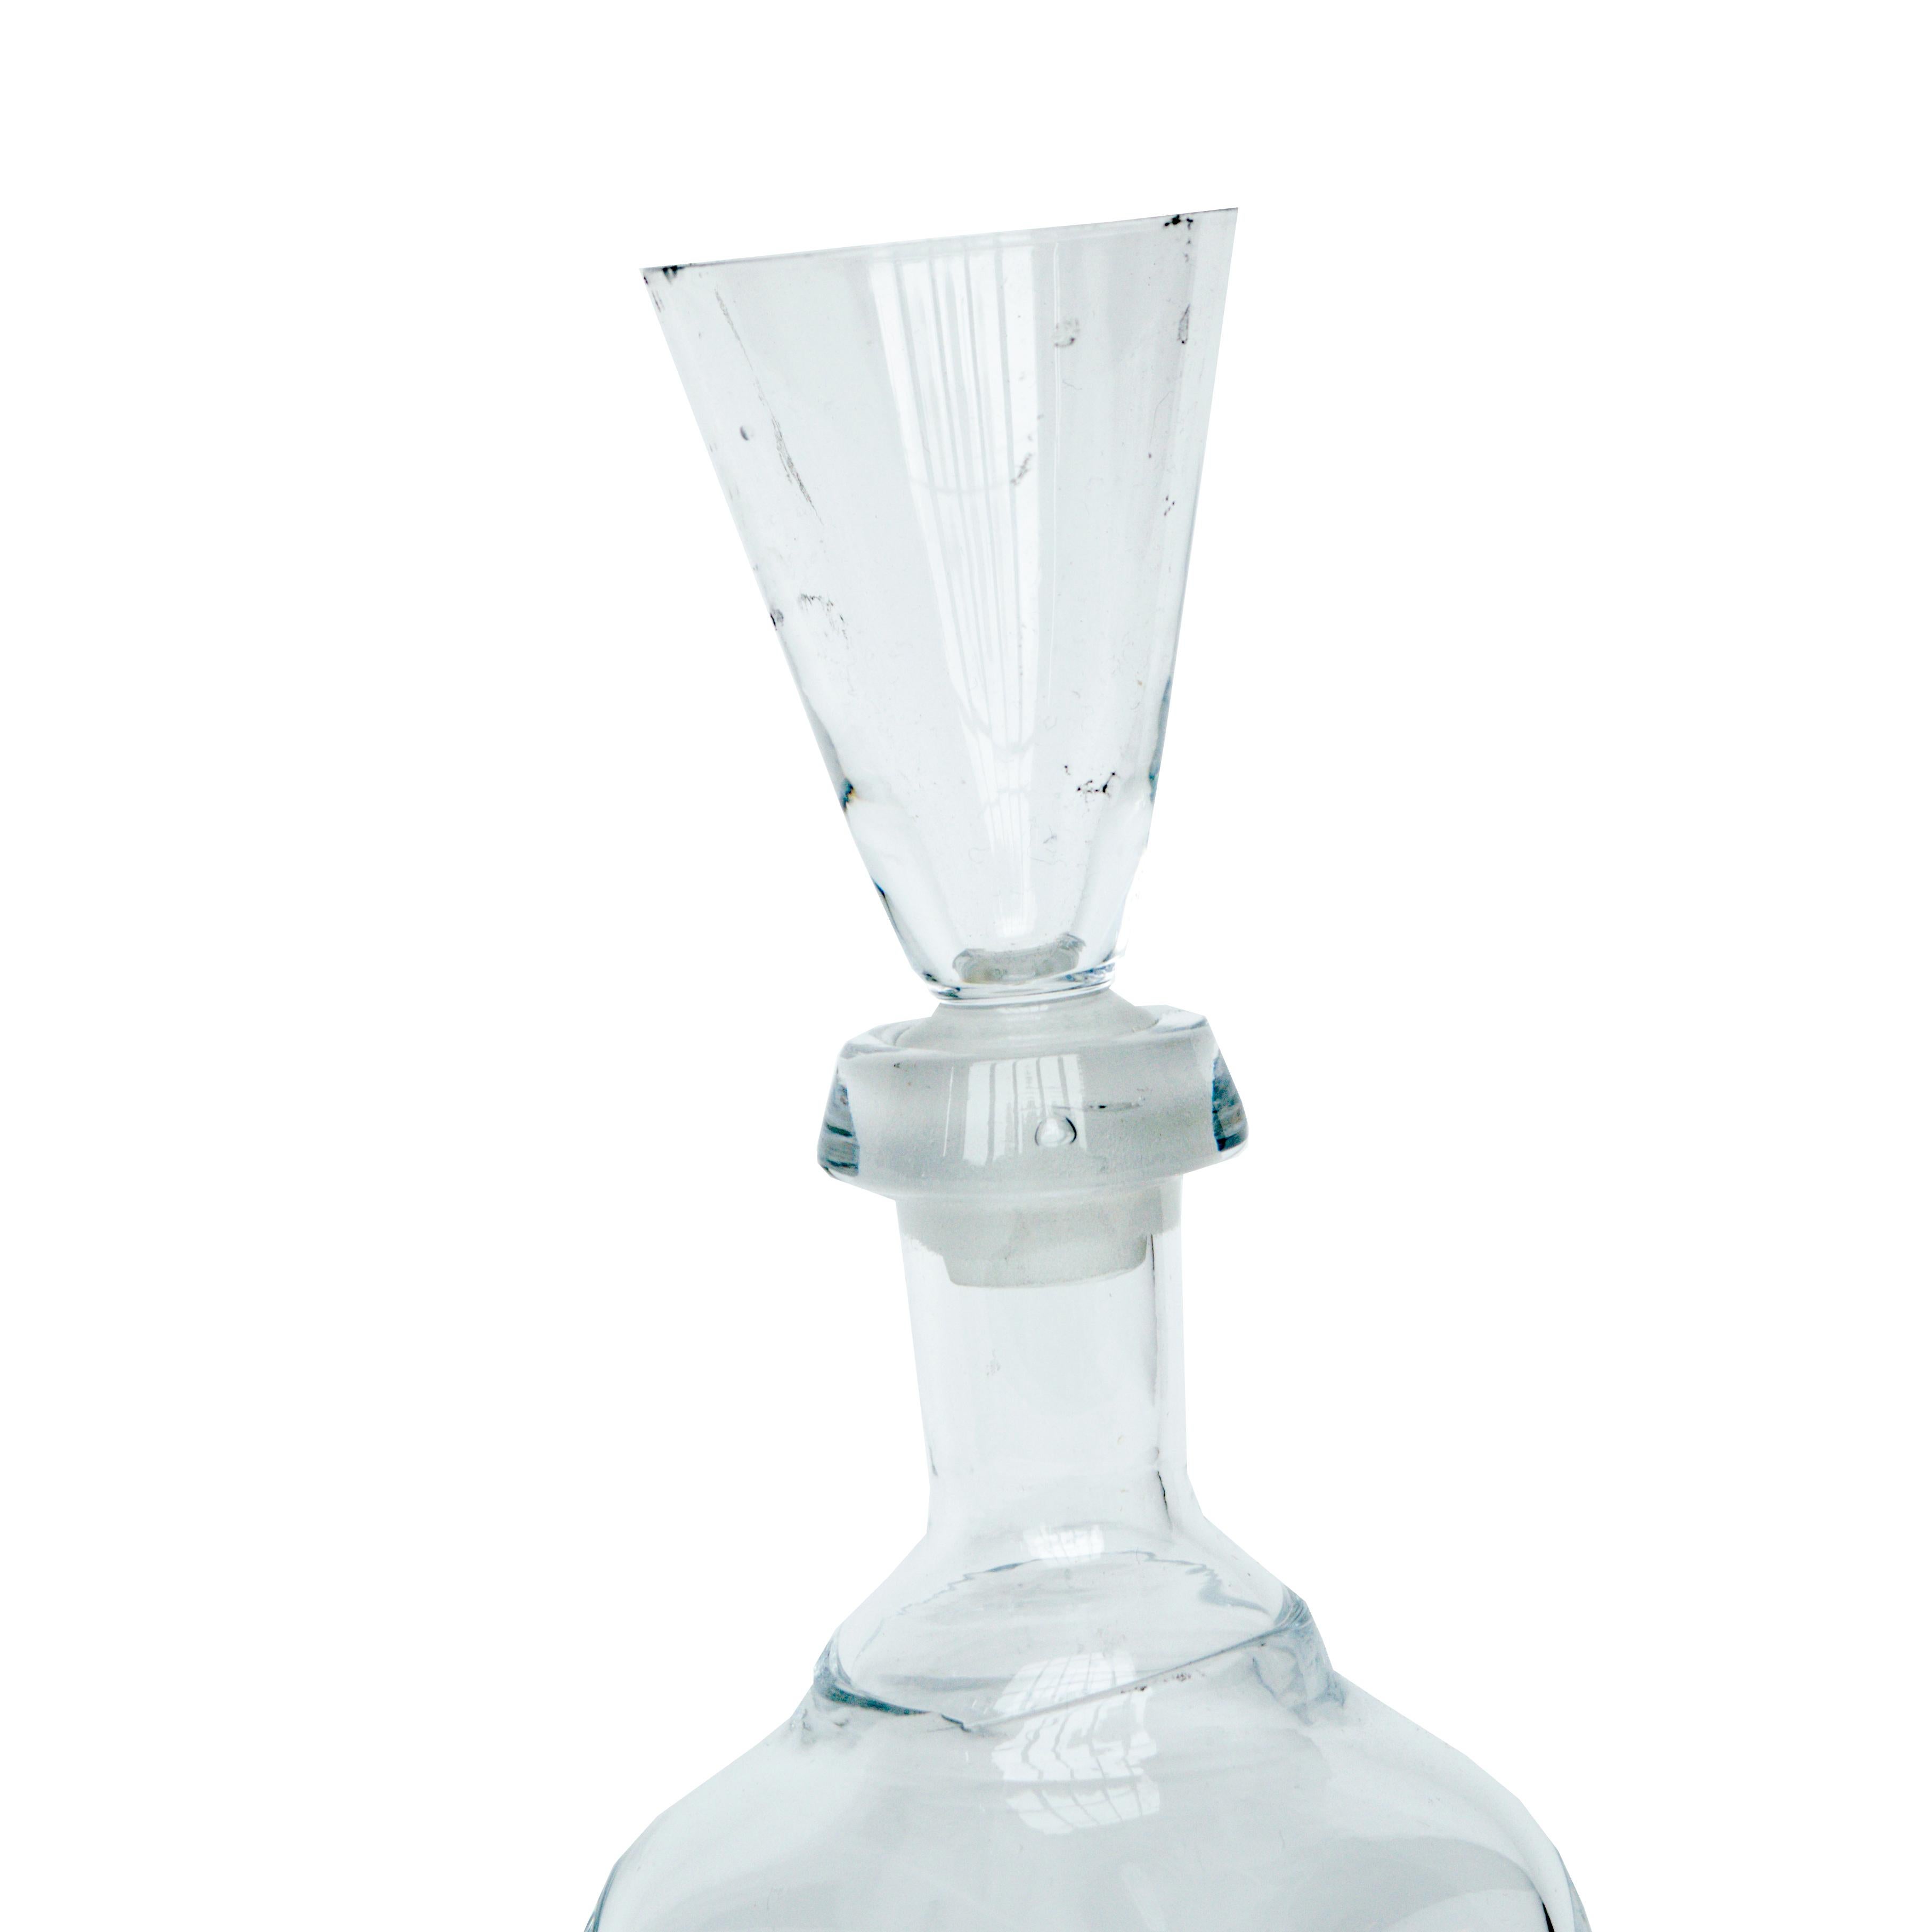 Jugendstil Hand Blown Small Decanter with Snaps Glass/Cork from Sweden, Early 1900s For Sale